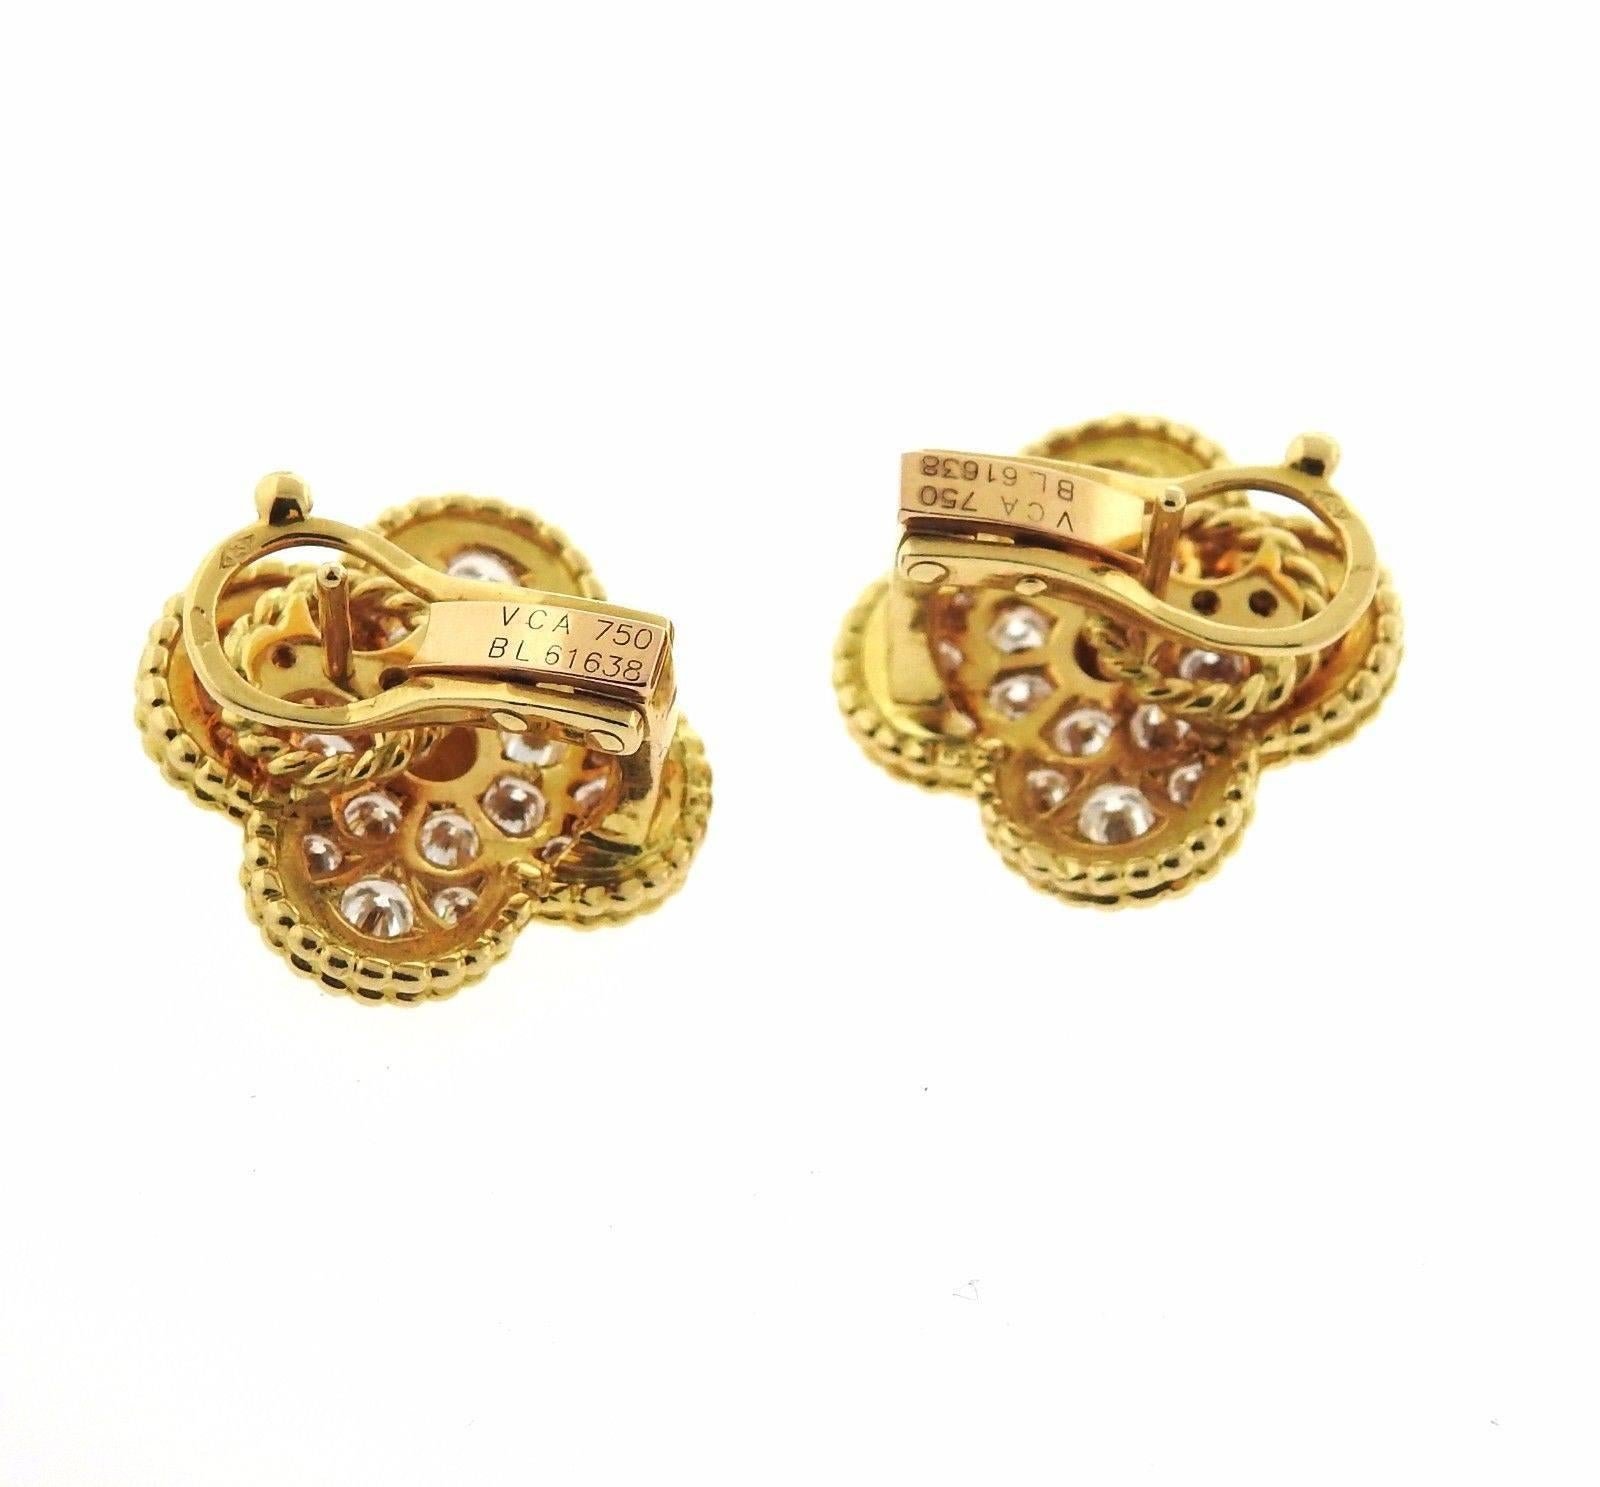 A pair of 18k yellow gold earrings set with 2.20ctw of FG/VVS diamonds.  Earrings are 20mm x 20mm and weigh 12.4 grams.  Marked: VCA, 750, BL61638. 